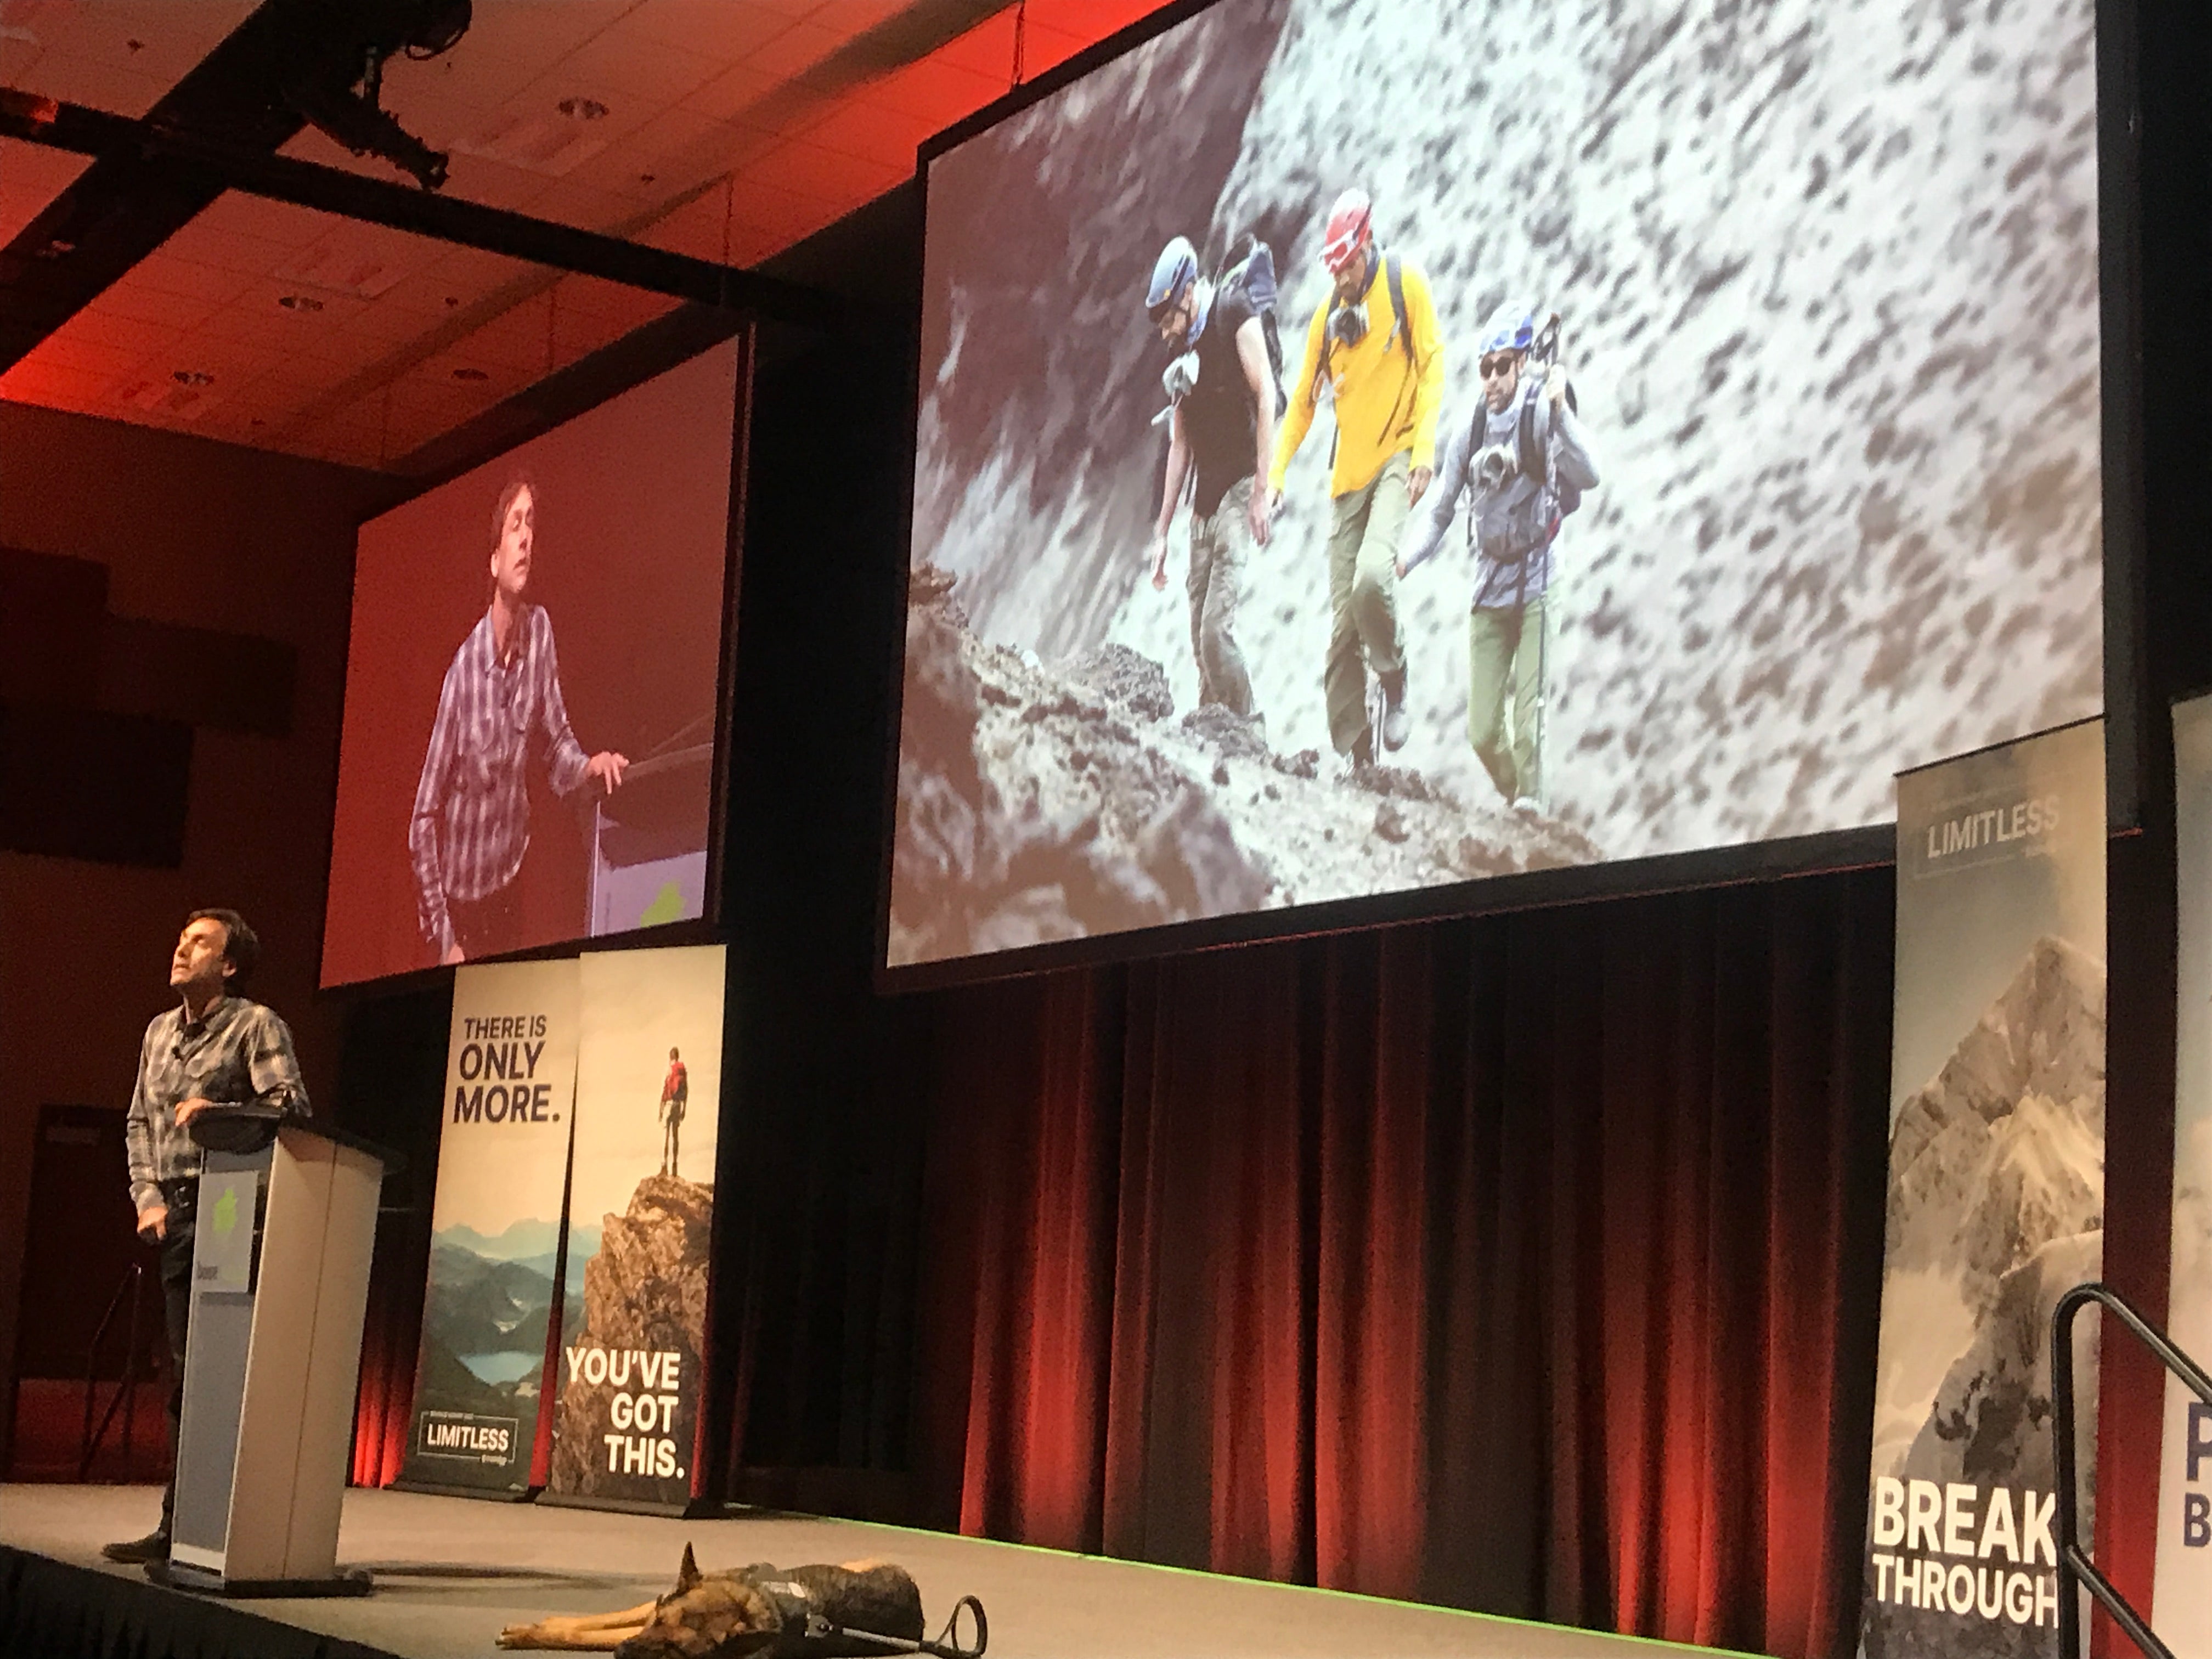 Erik on stage; service dog sleeps at his feet, presentation shows video of volcano trip